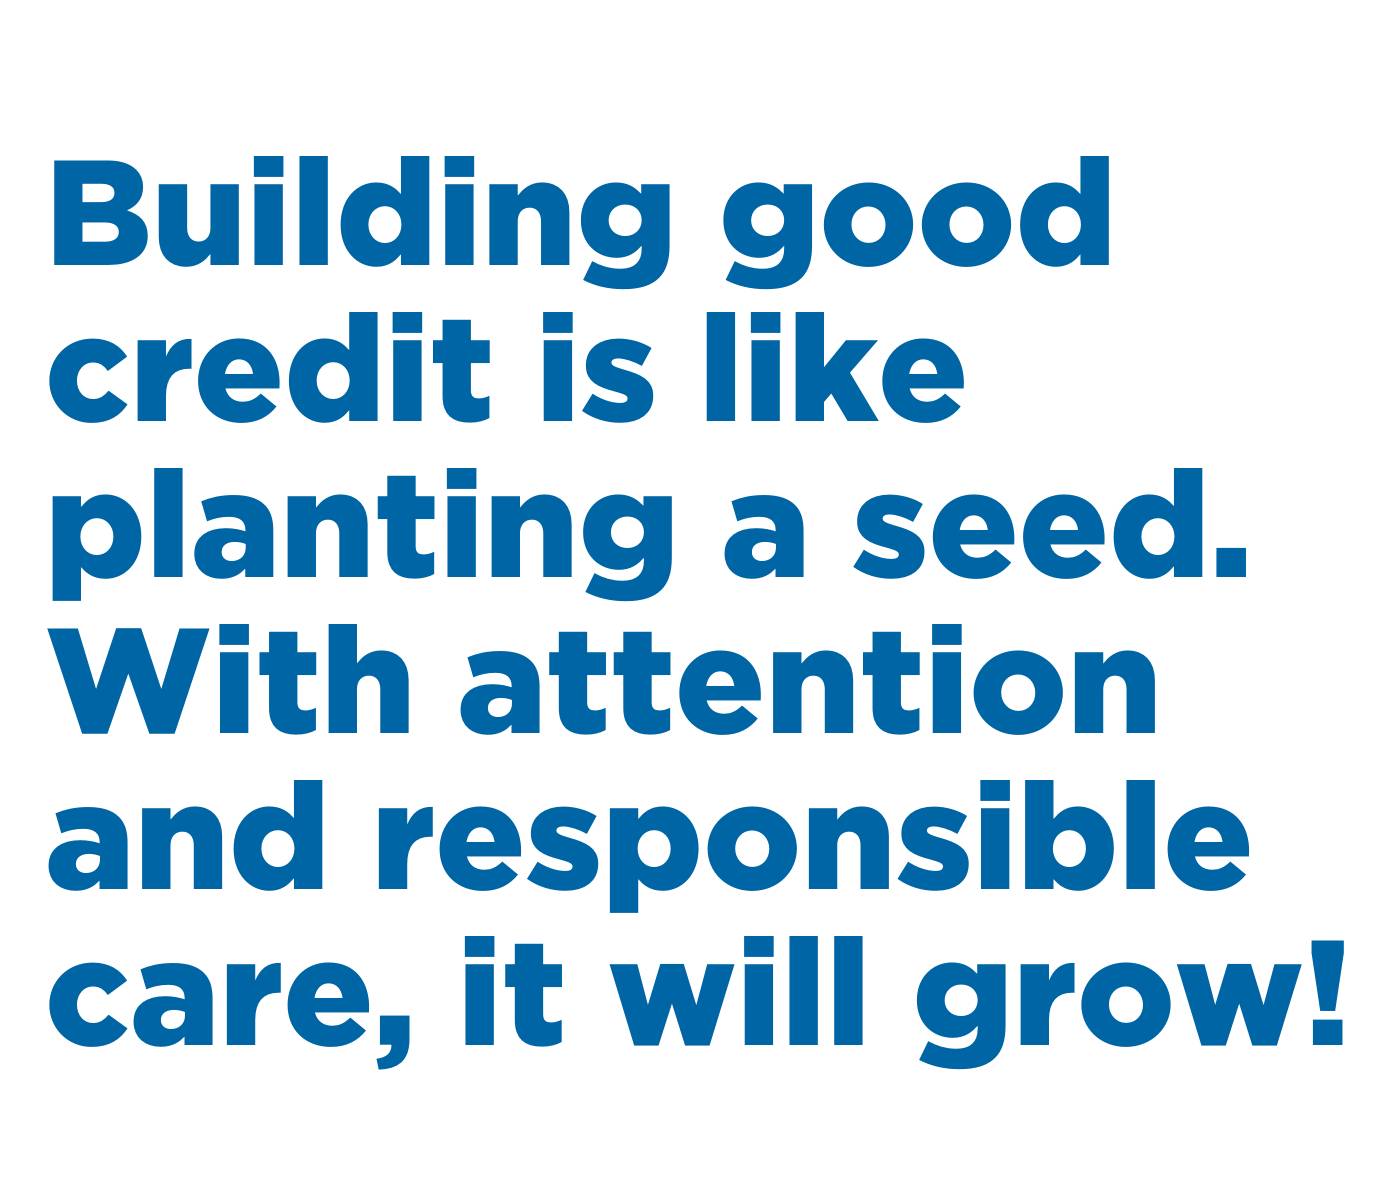 Building good credit is like planting a seed. With attention and responsible care, it will grow!